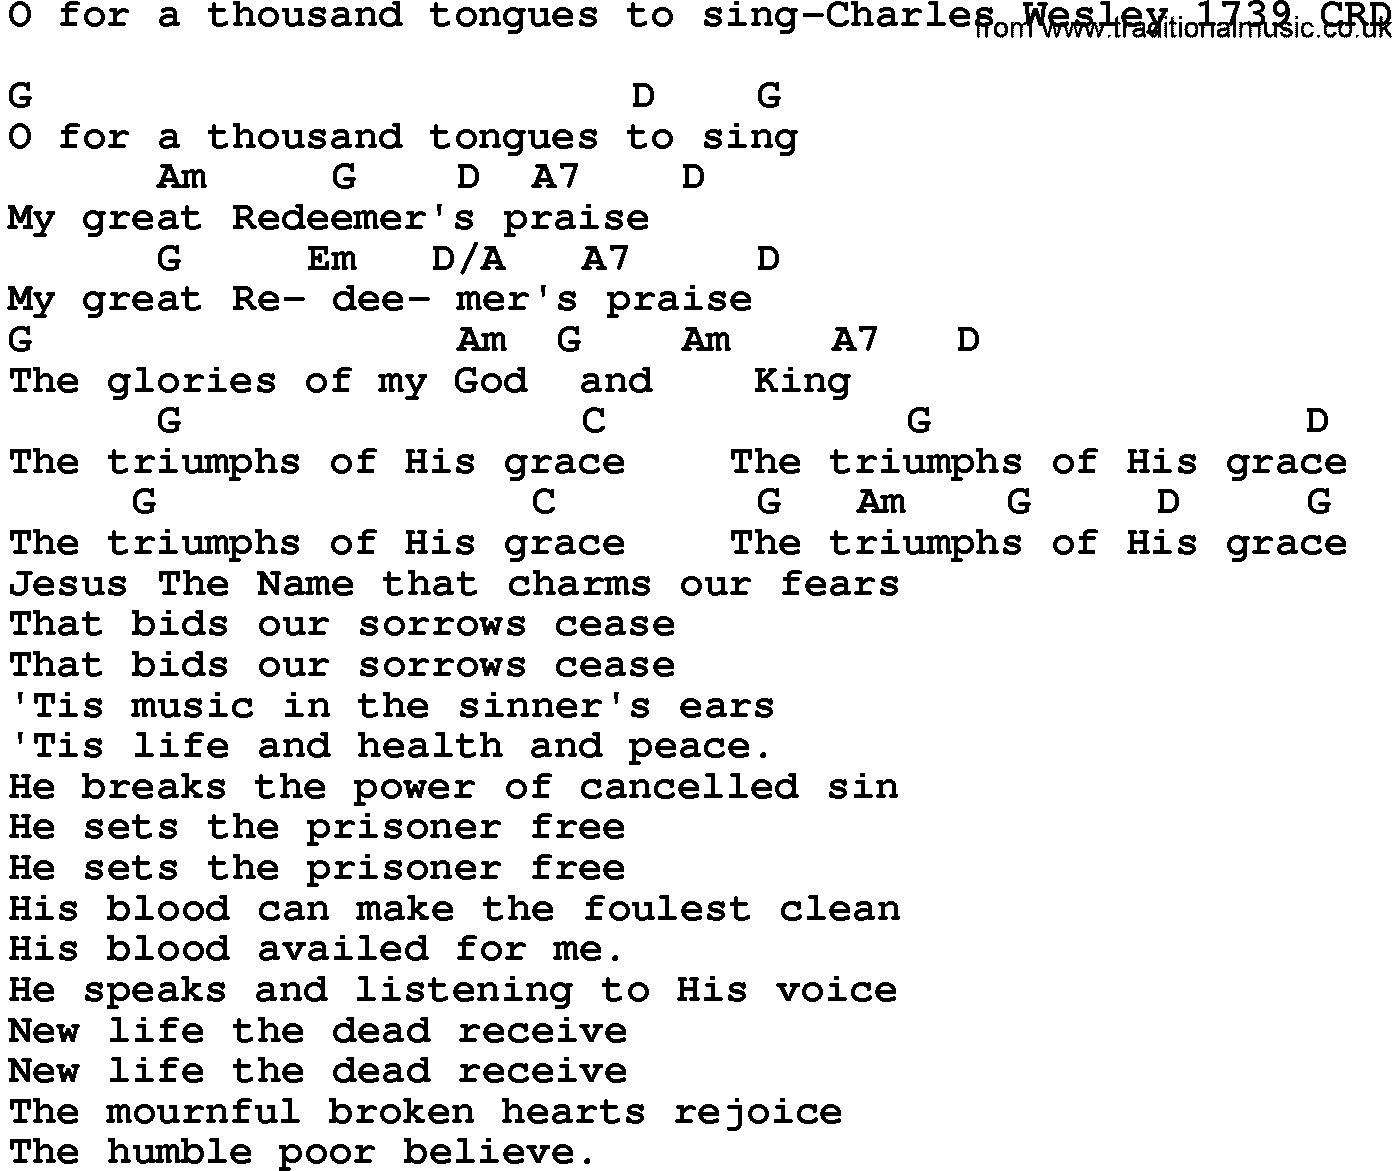 Gospel Song: O For A Thousand Tongues To Sing-Charles Wesley 1739, lyrics and chords.